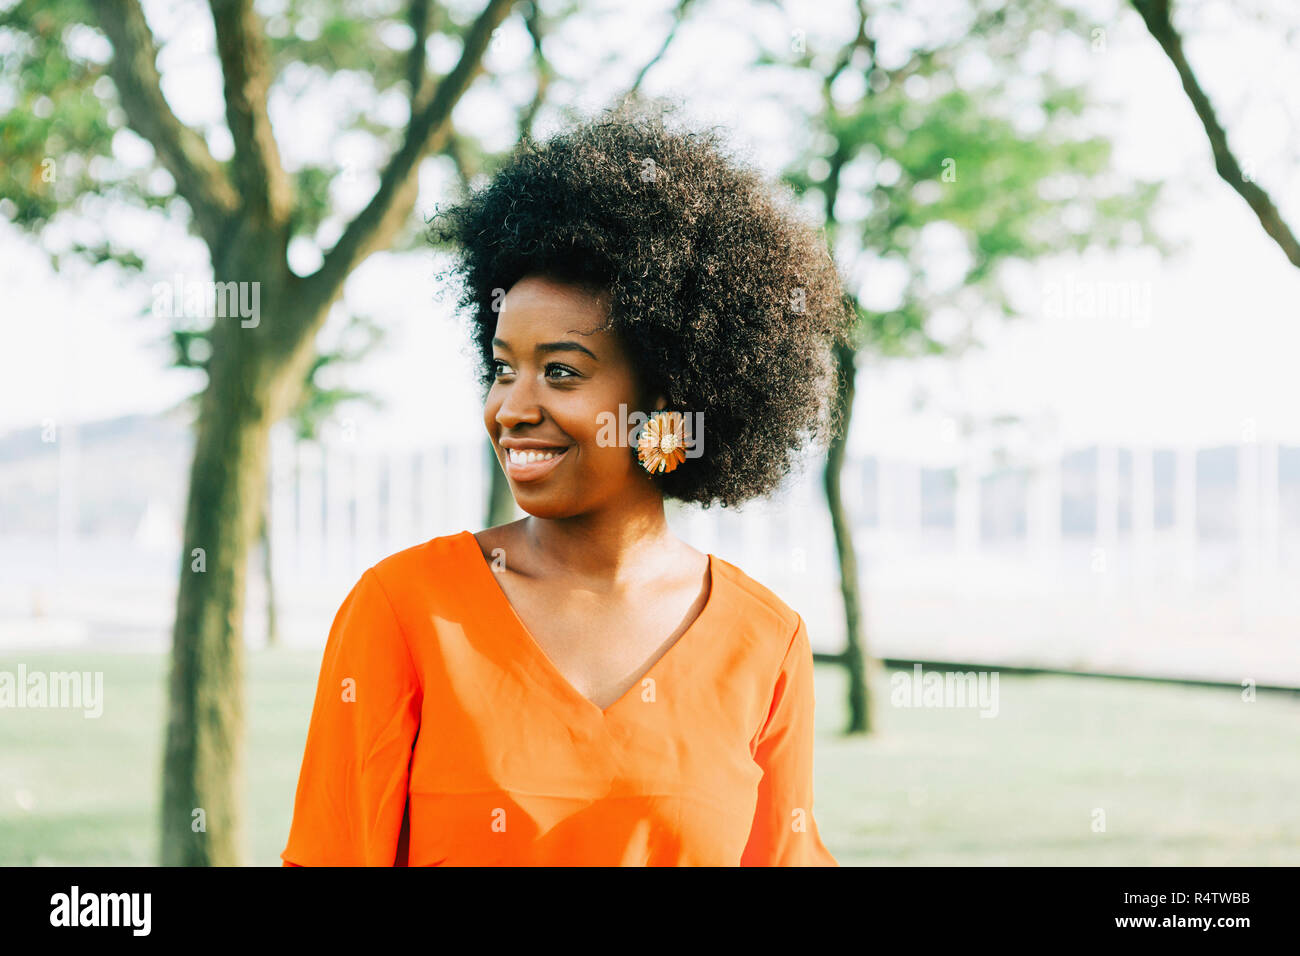 Confident, smiling young woman in sunny park Stock Photo